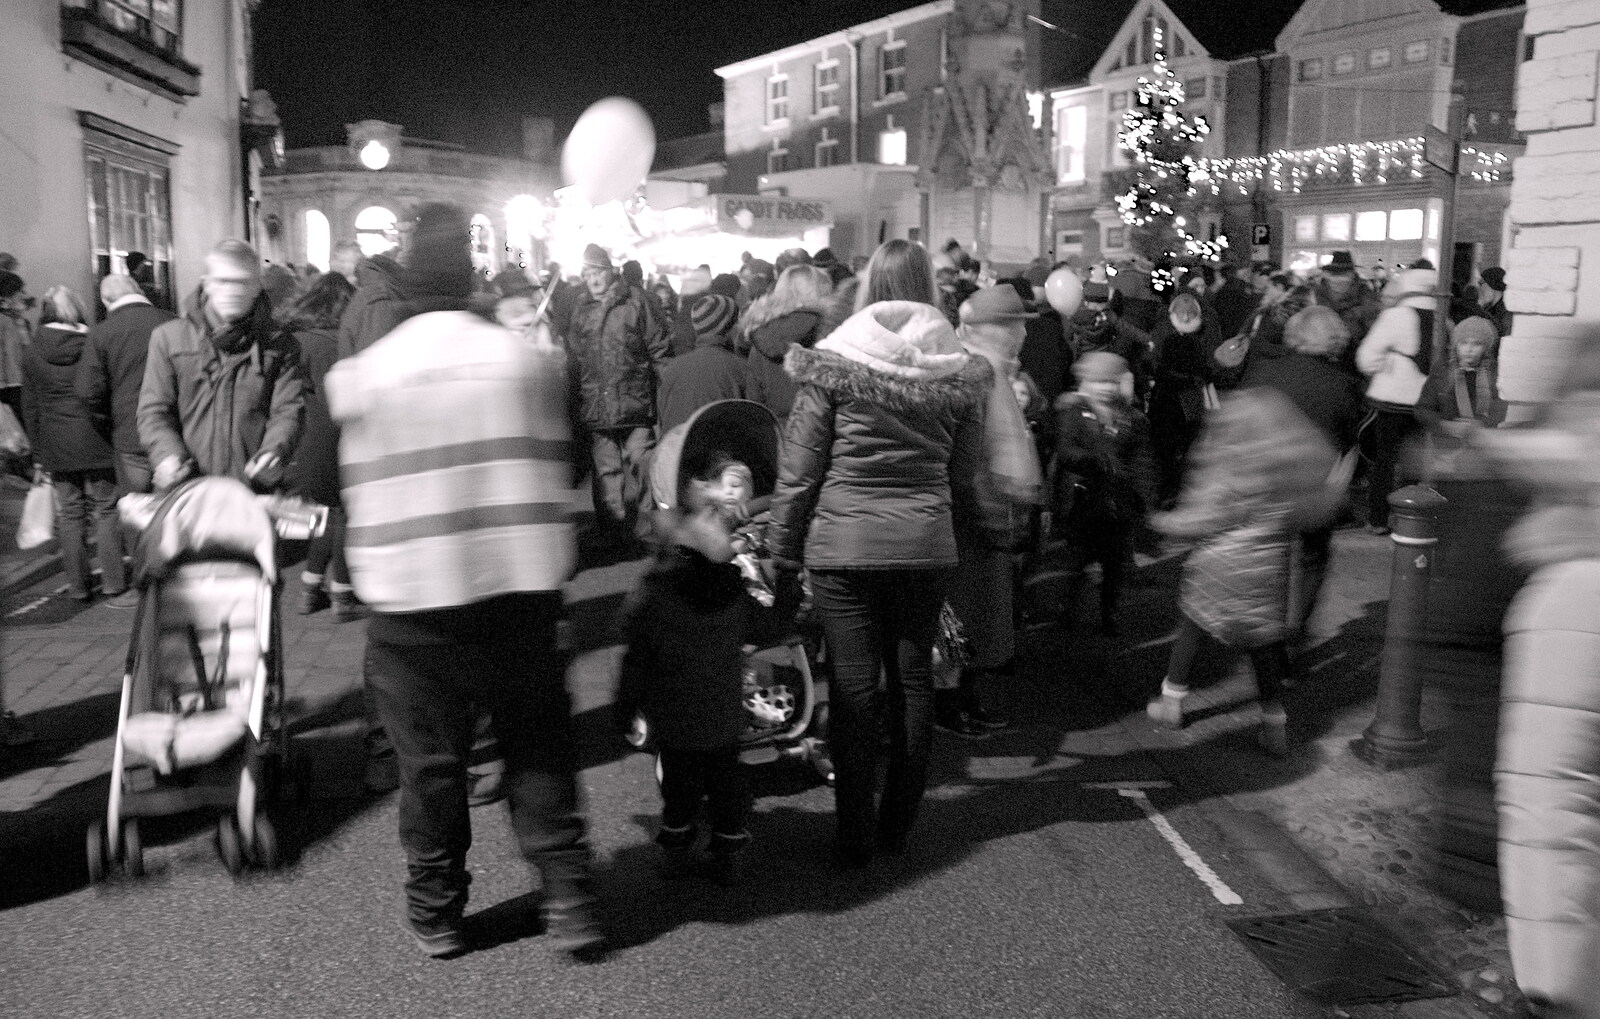 The crowds around the Christmas tree from The Eye Christmas Lights, Eye, Suffolk - 1st December 2017